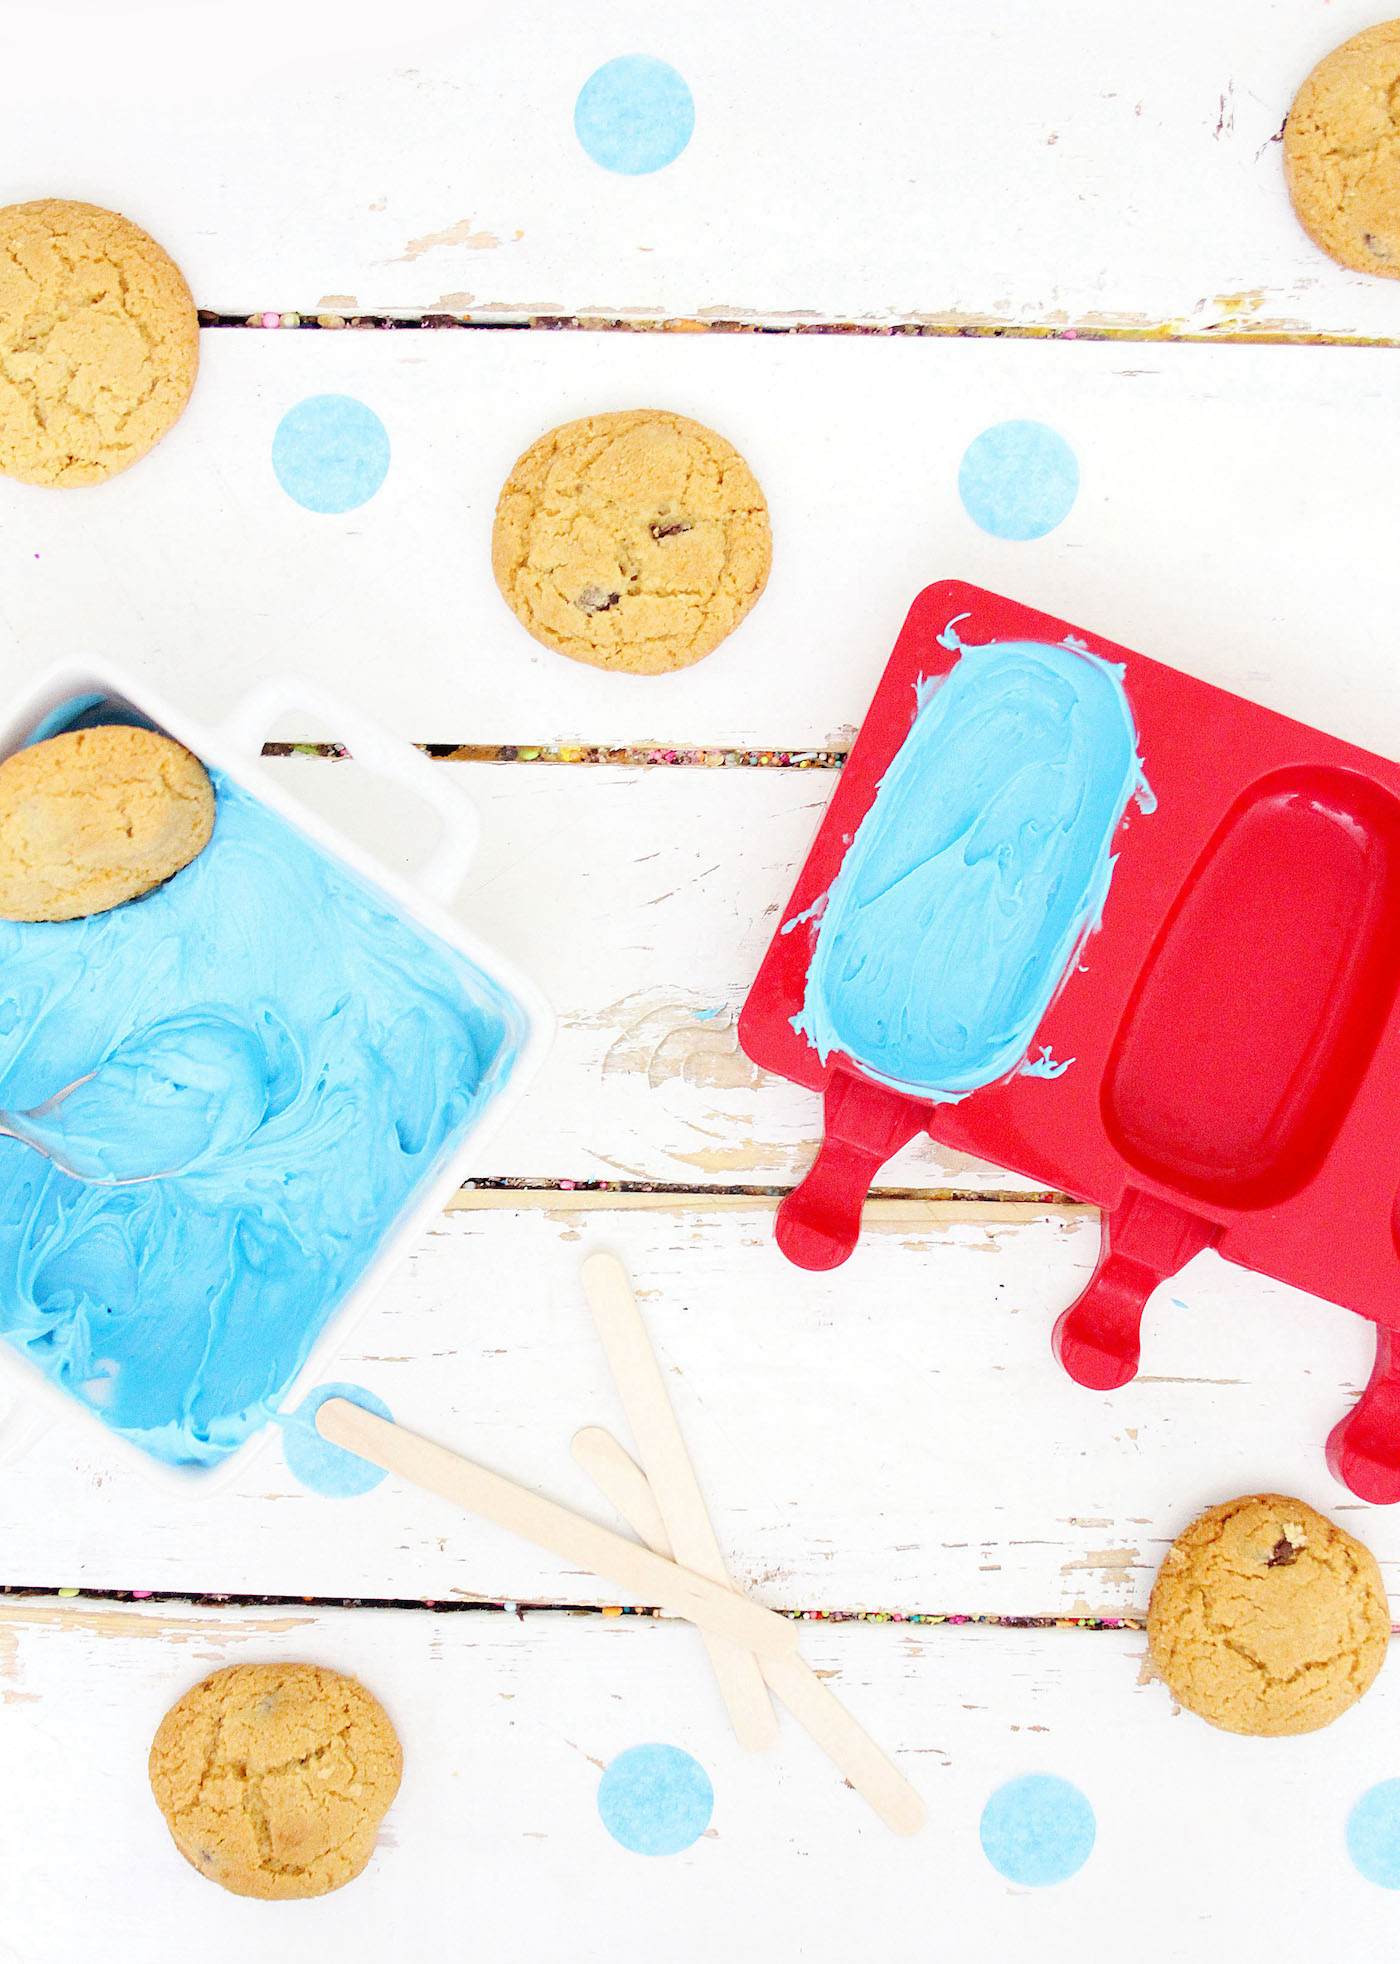 Adding blue melted candy melts to a cake popsicle mold